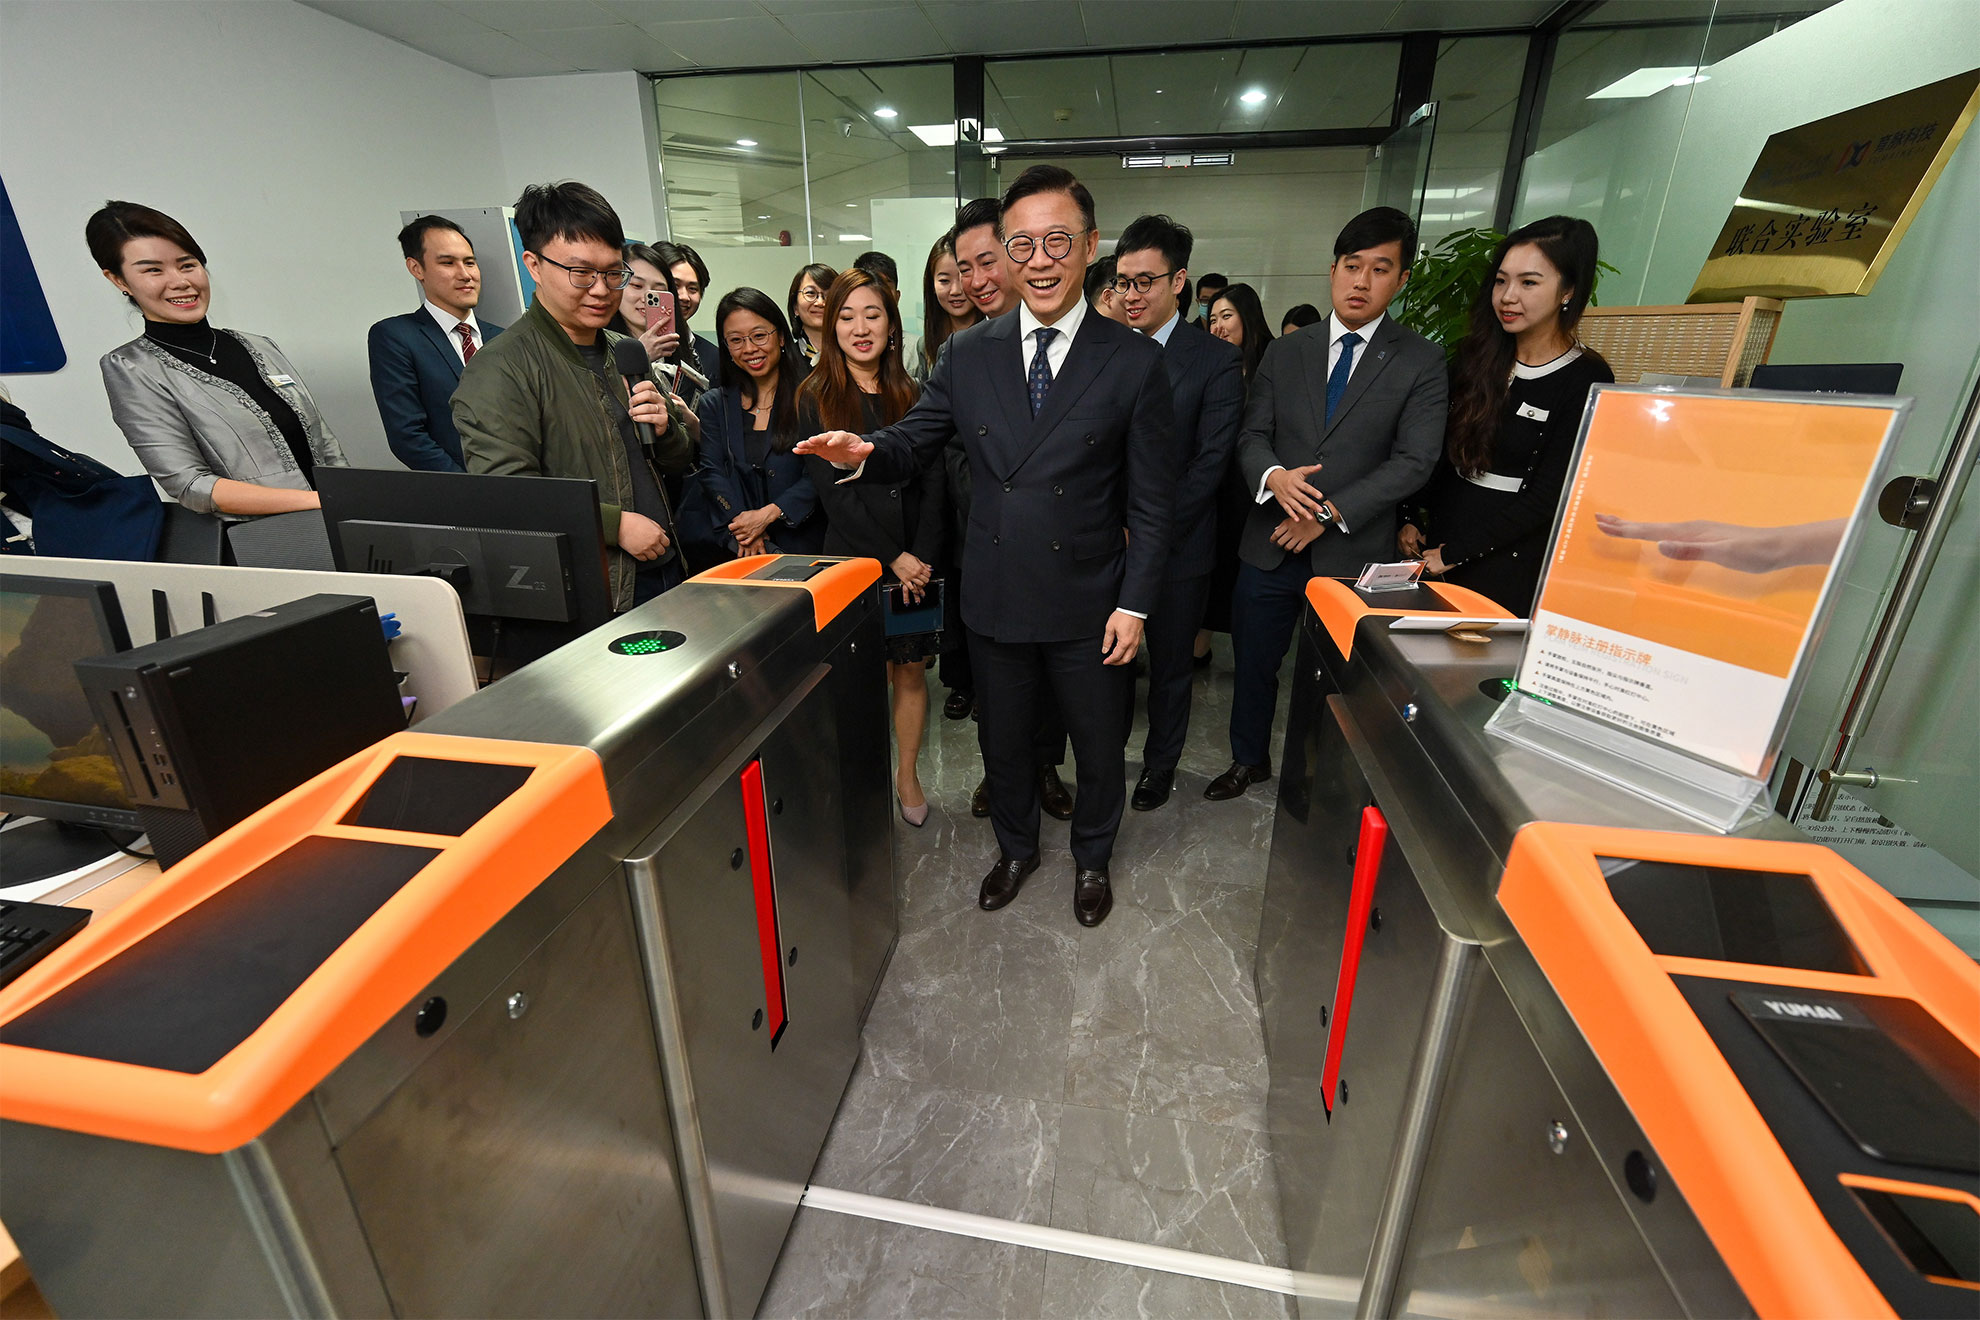 The Deputy Secretary for Justice, Mr Cheung Kwok-kwan, and a delegation of young lawyers led by him today (November 18) visited the Foshan Hong Kong-Macao Youth Entrepreneurship Center. Photo shows Mr Cheung (centre) trying out one of the incubating entrepreneurship projects.